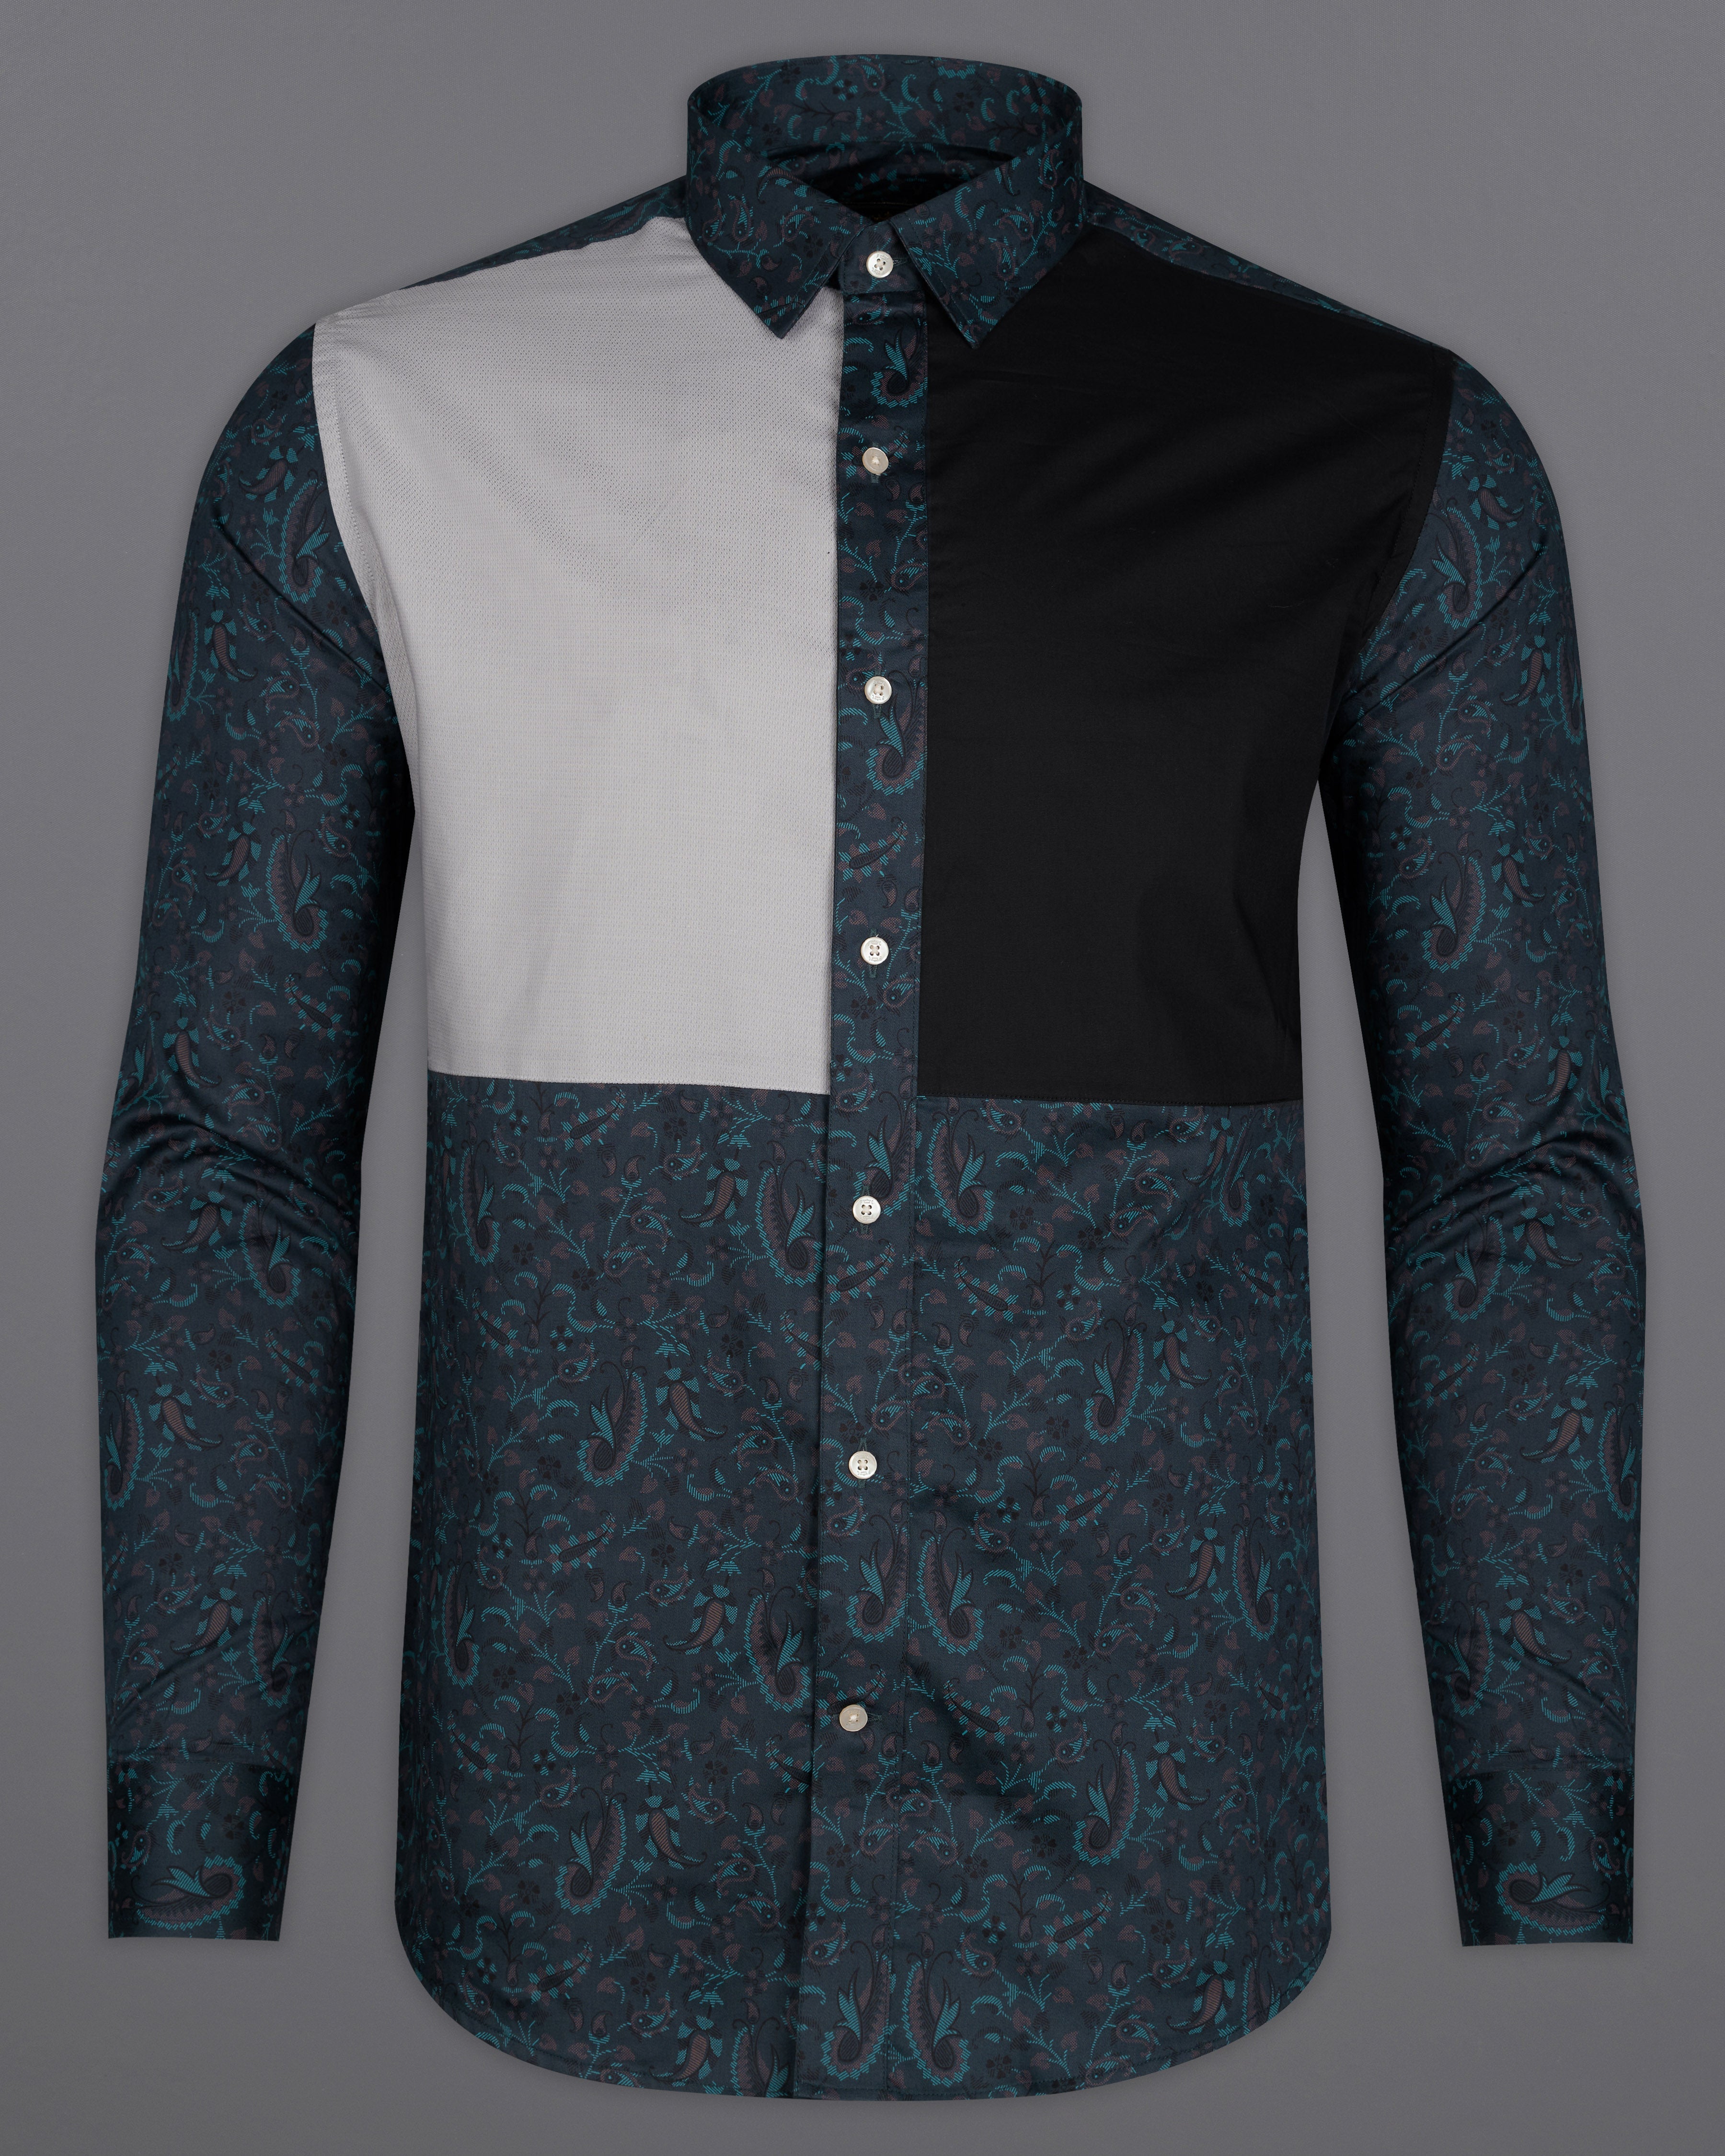 Charade Green Paisley Printed with Nobel Gray and Black Patchwork Super Soft Premium Cotton Designer Shirt 9888-P235-38, 9888-P235-H-38, 9888-P235-39, 9888-P235-H-39, 9888-P235-40, 9888-P235-H-40, 9888-P235-42, 9888-P235-H-42, 9888-P235-44, 9888-P235-H-44, 9888-P235-46, 9888-P235-H-46, 9888-P235-48, 9888-P235-H-48, 9888-P235-50, 9888-P235-H-50, 9888-P235-52, 9888-P235-H-52